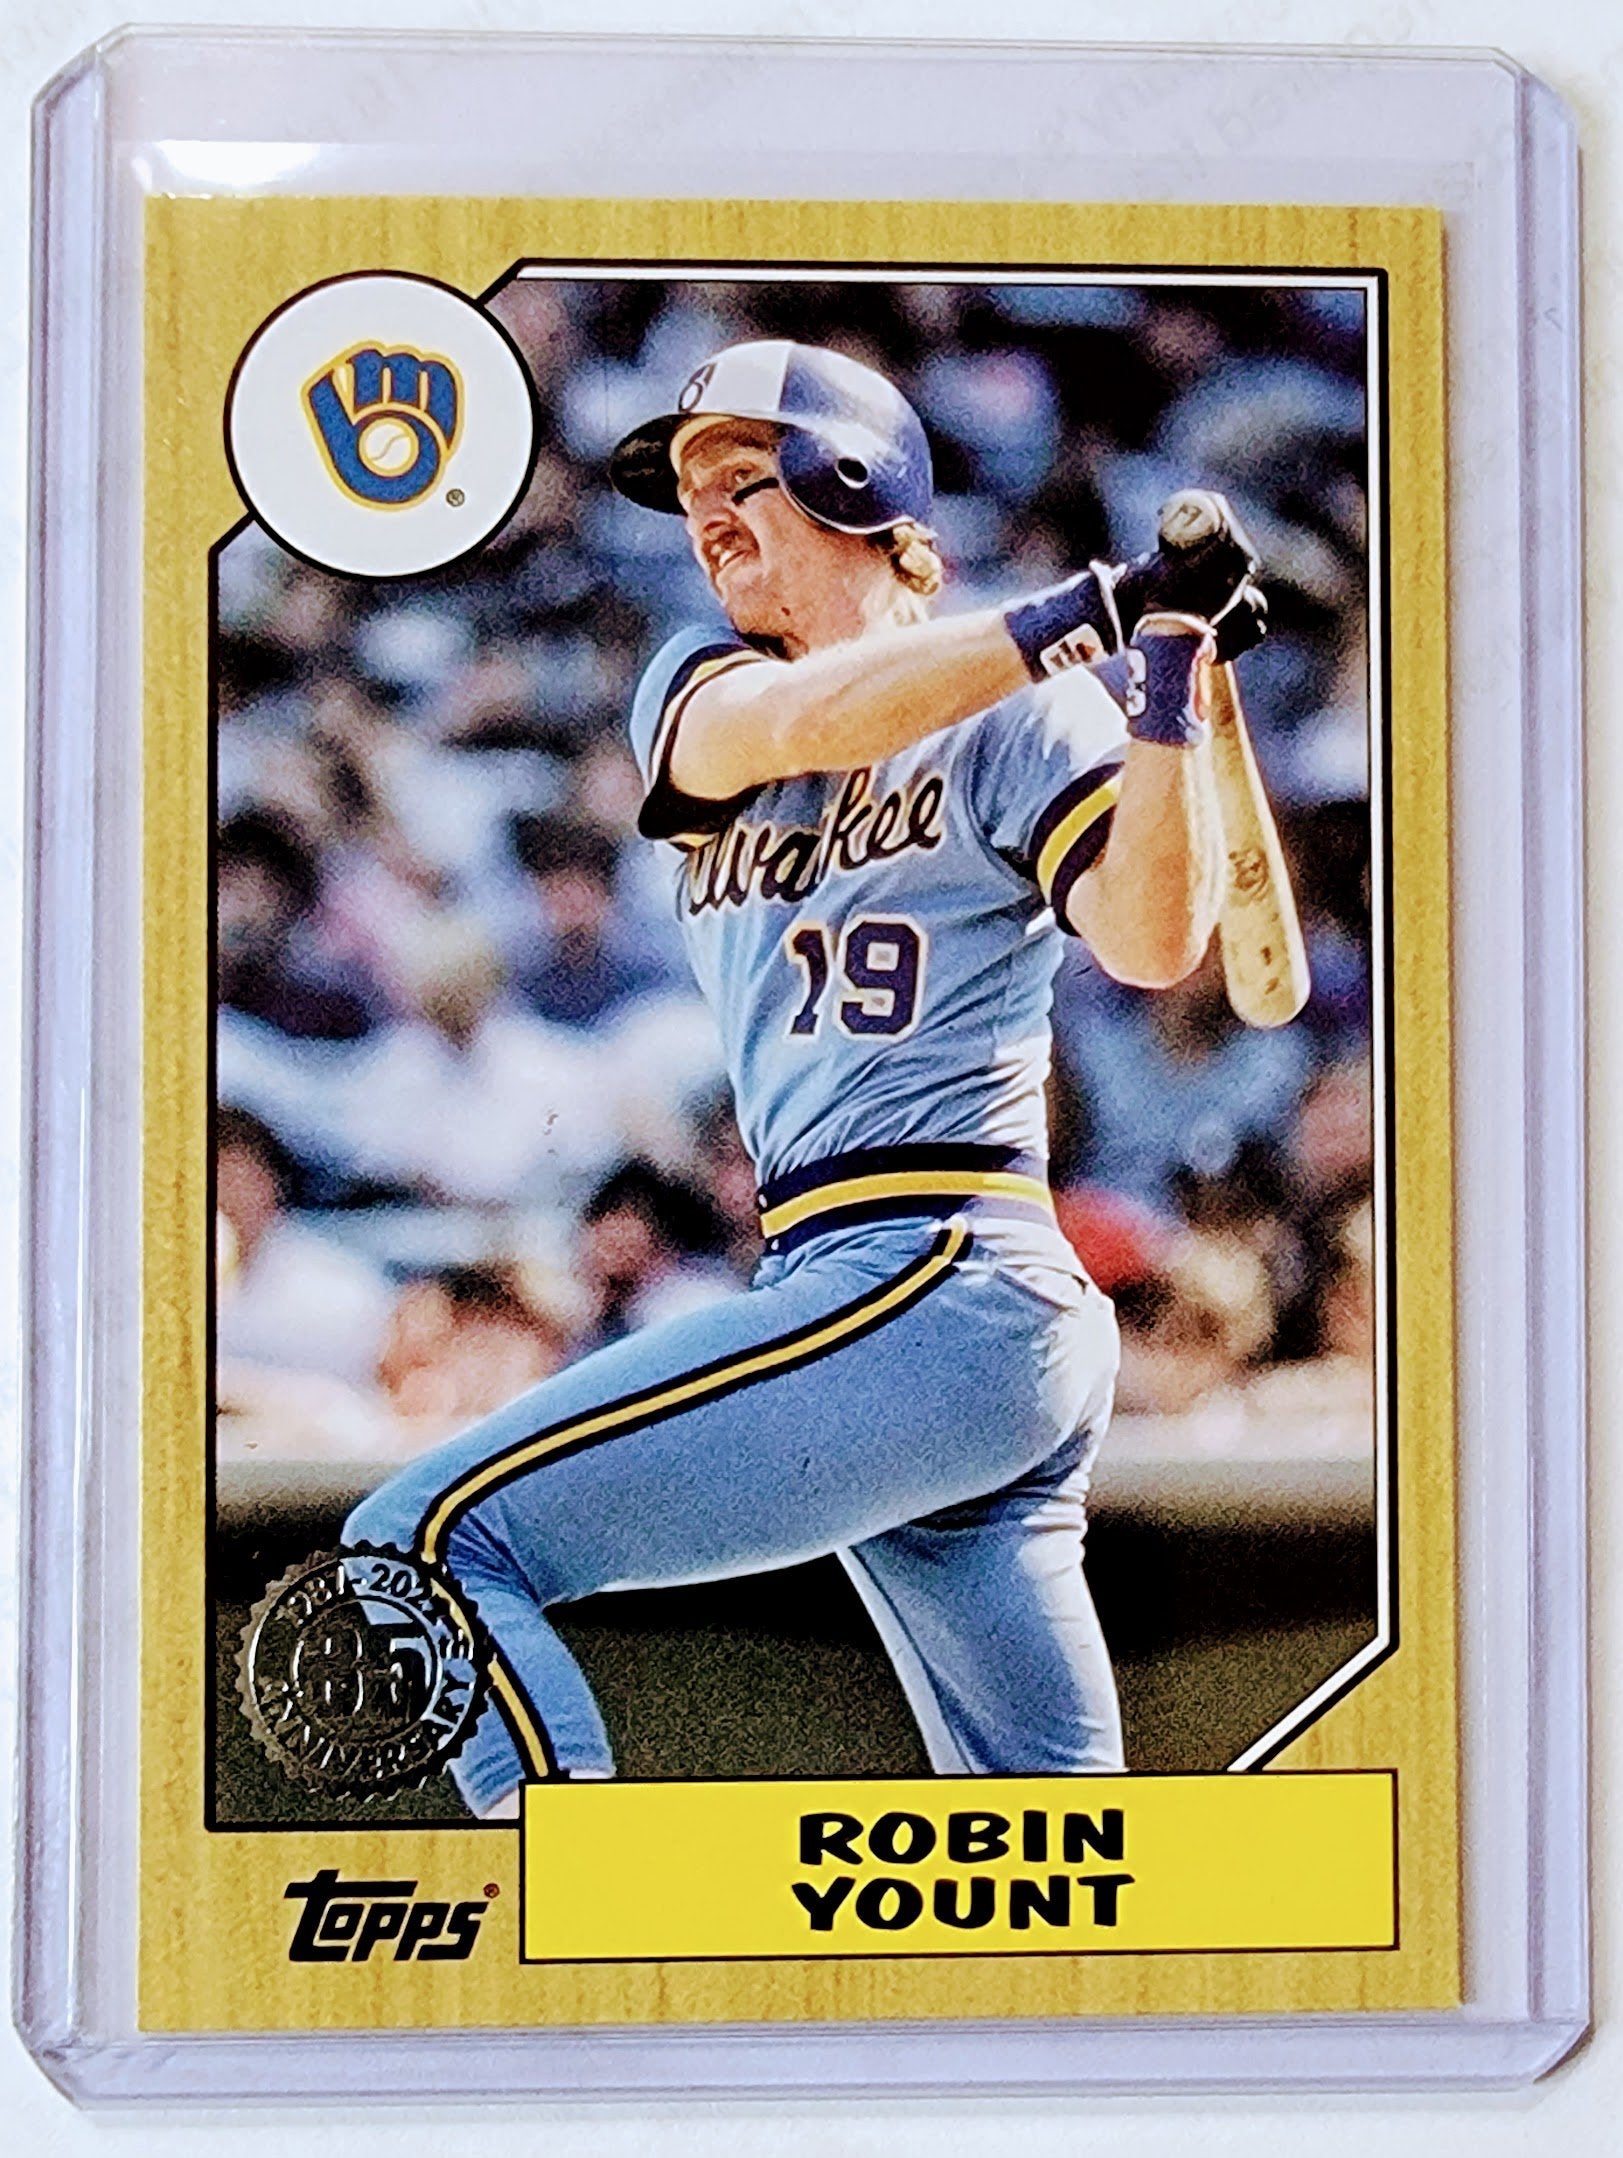 2022 Topps Series Robin Yount 35th Anniversary 1987 Baseball Trading Card  GRB1